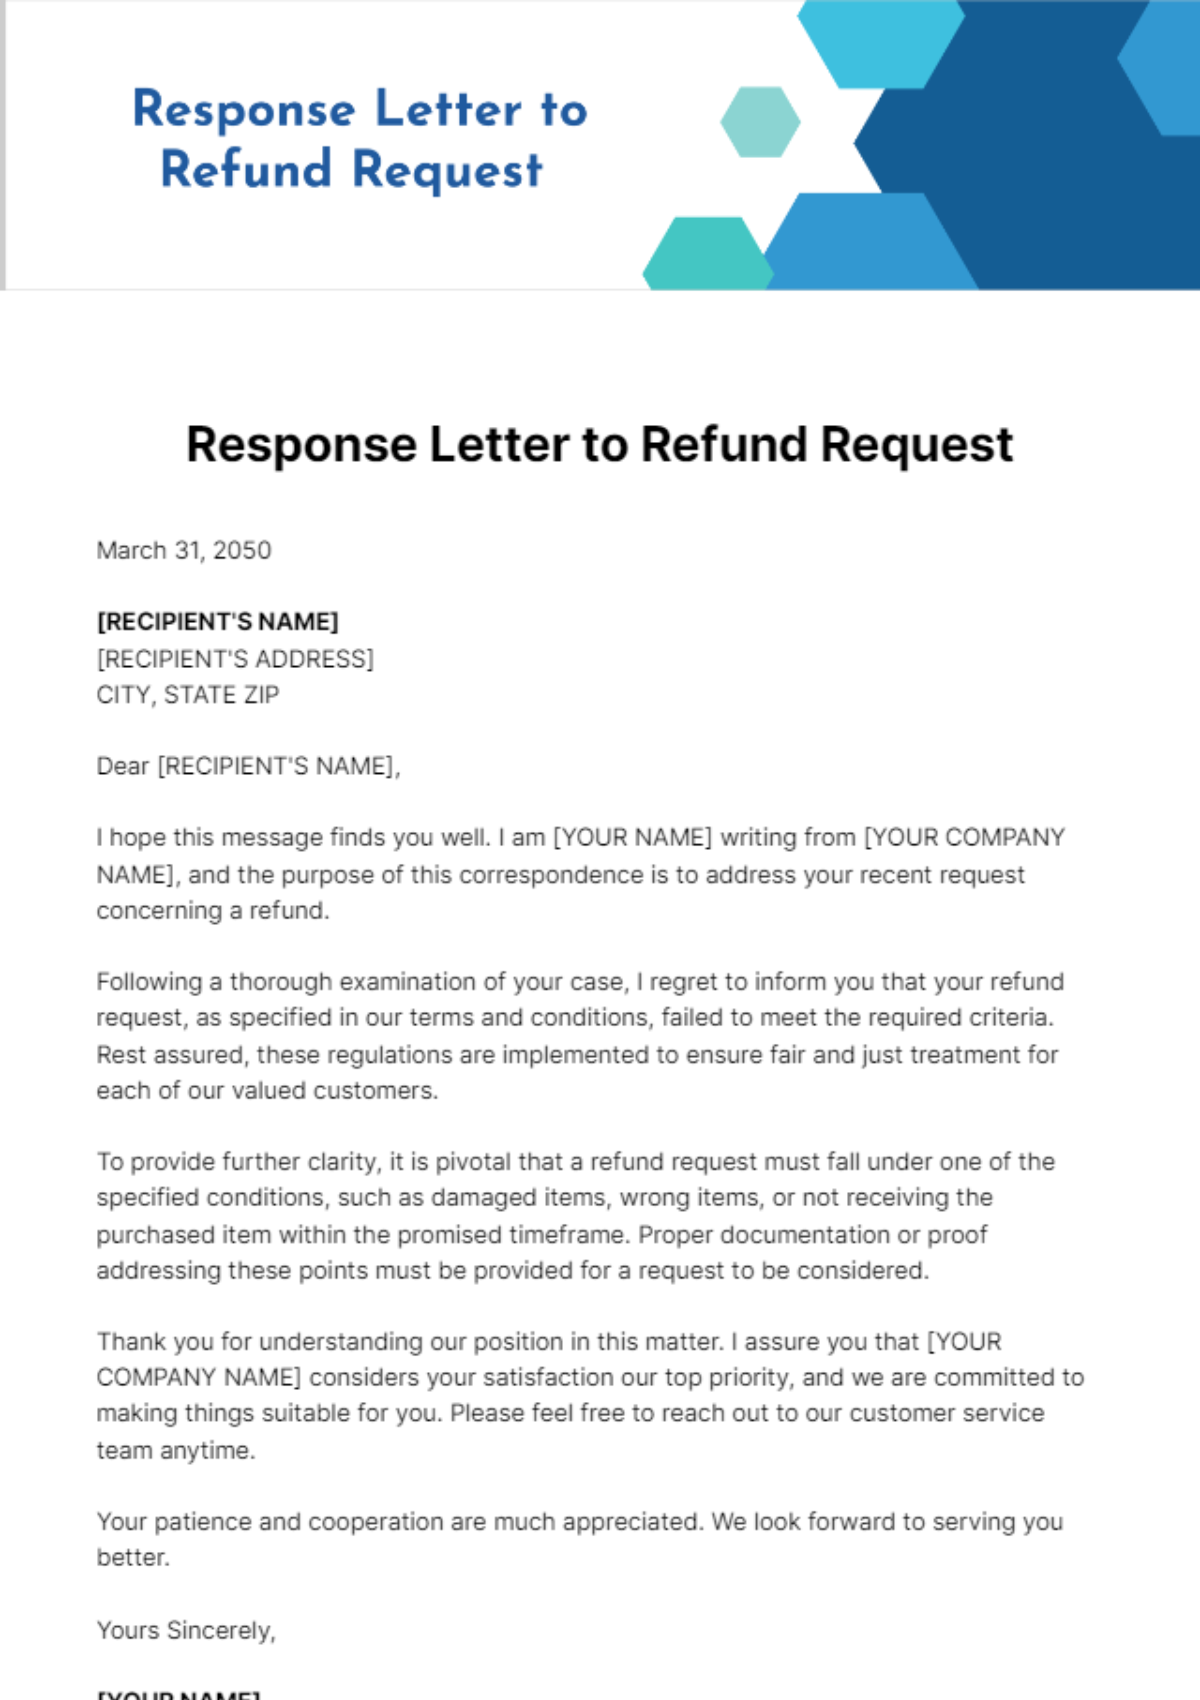 Response Letter to Refund Request Template